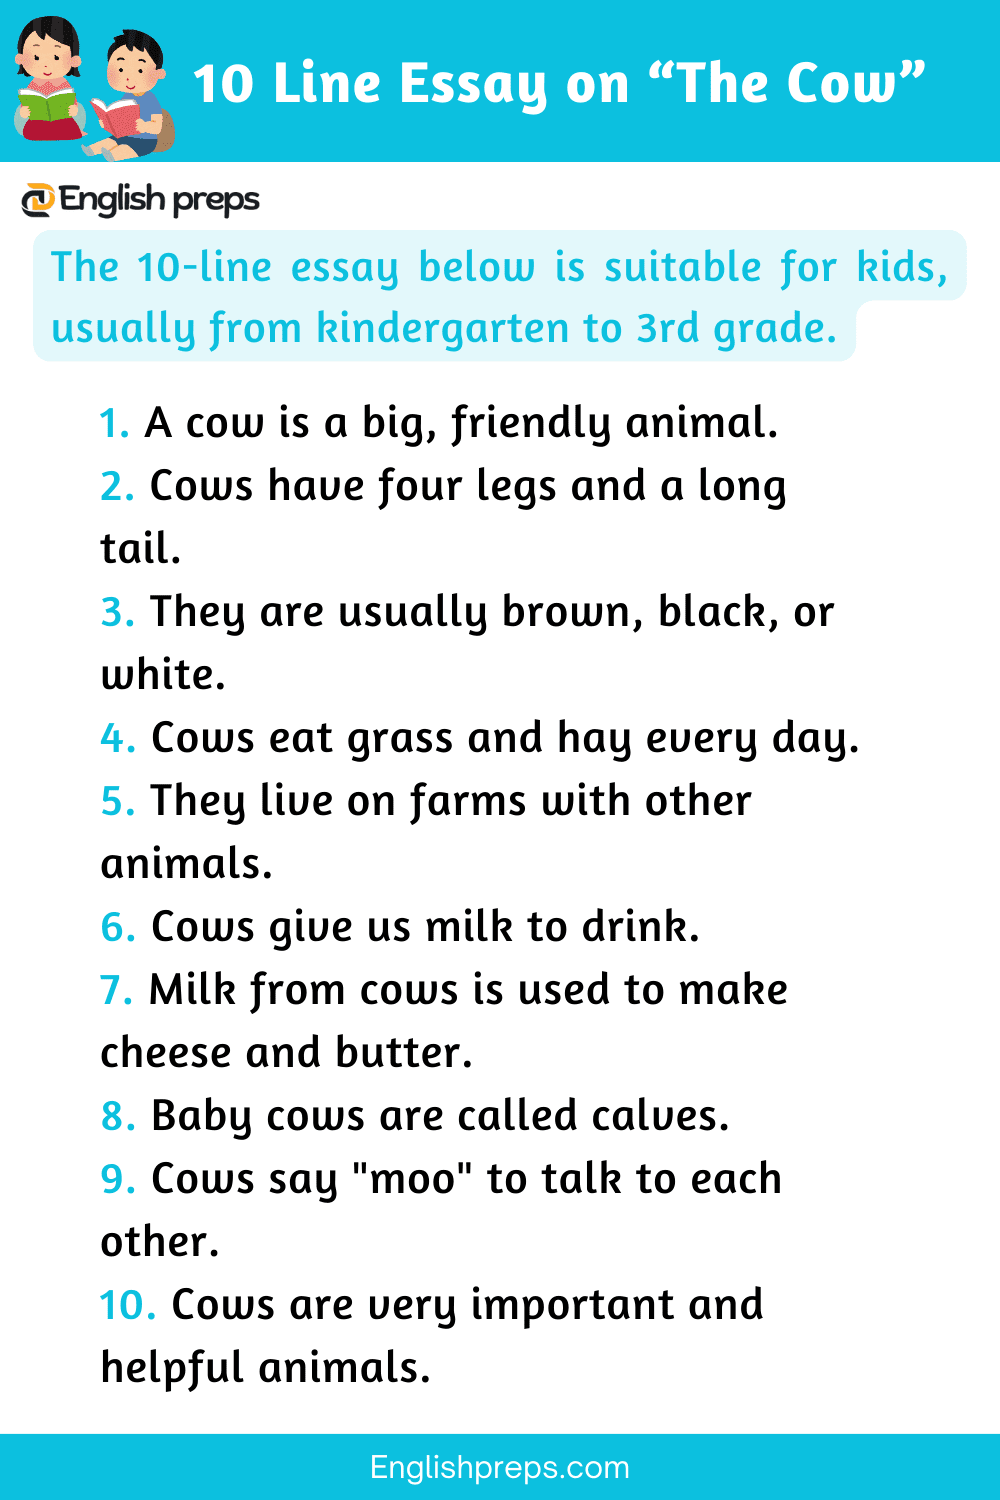 Cow Essay in 10 Lines for Kids